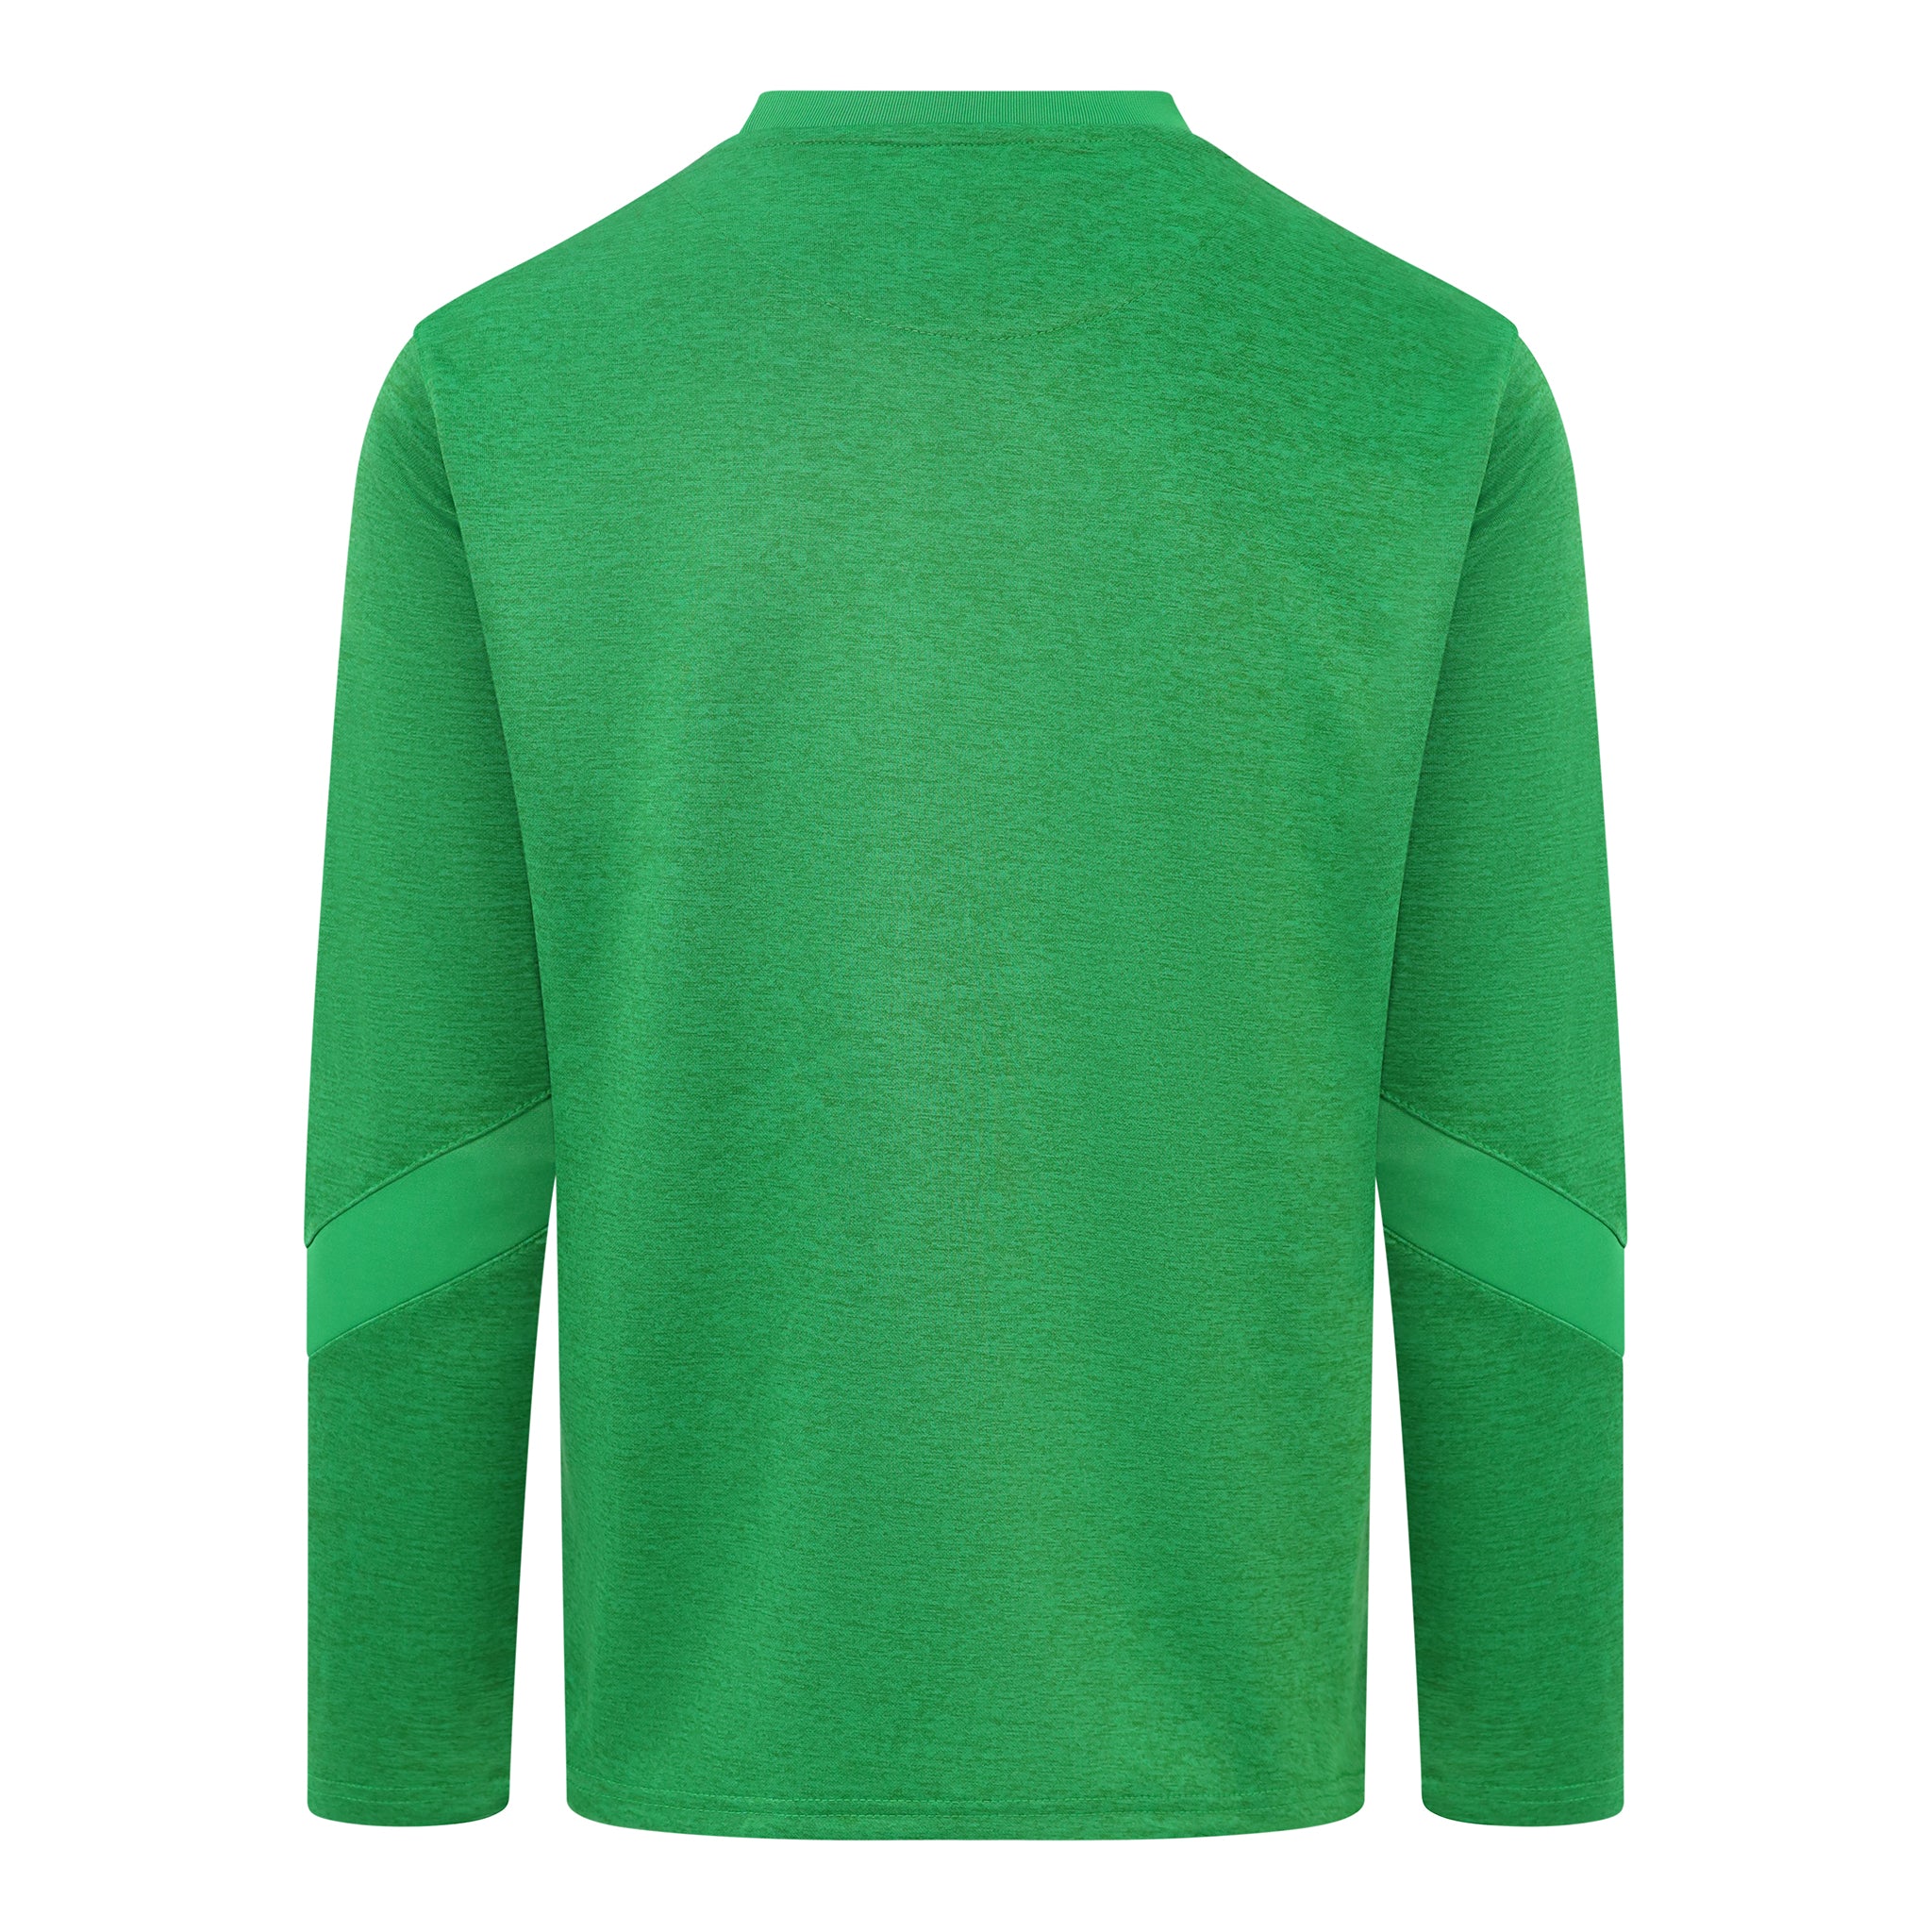 Mc Keever Core 22 Sweat Top - Adult - Green